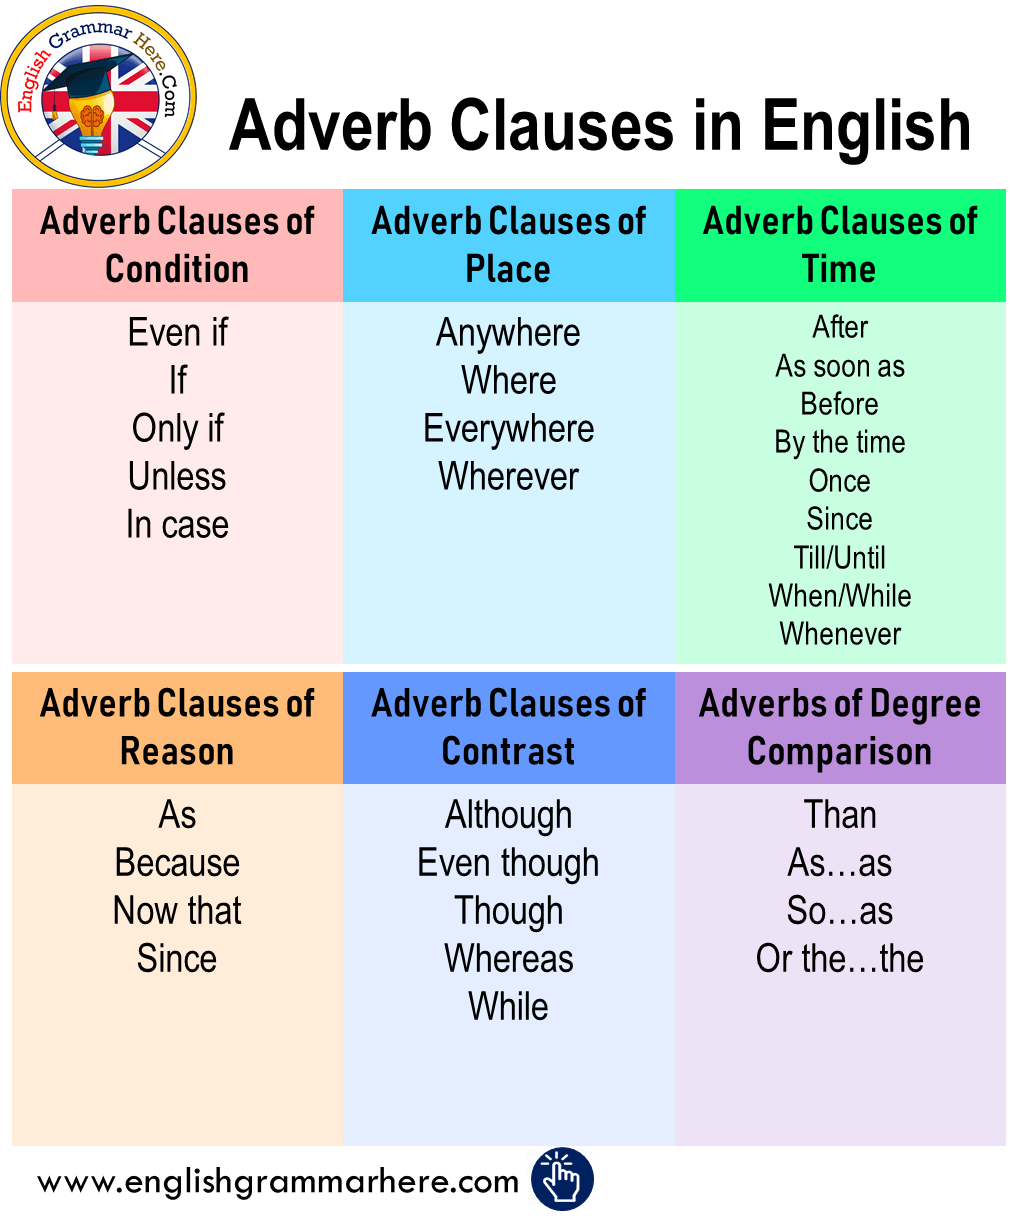 Adverb Clauses in English